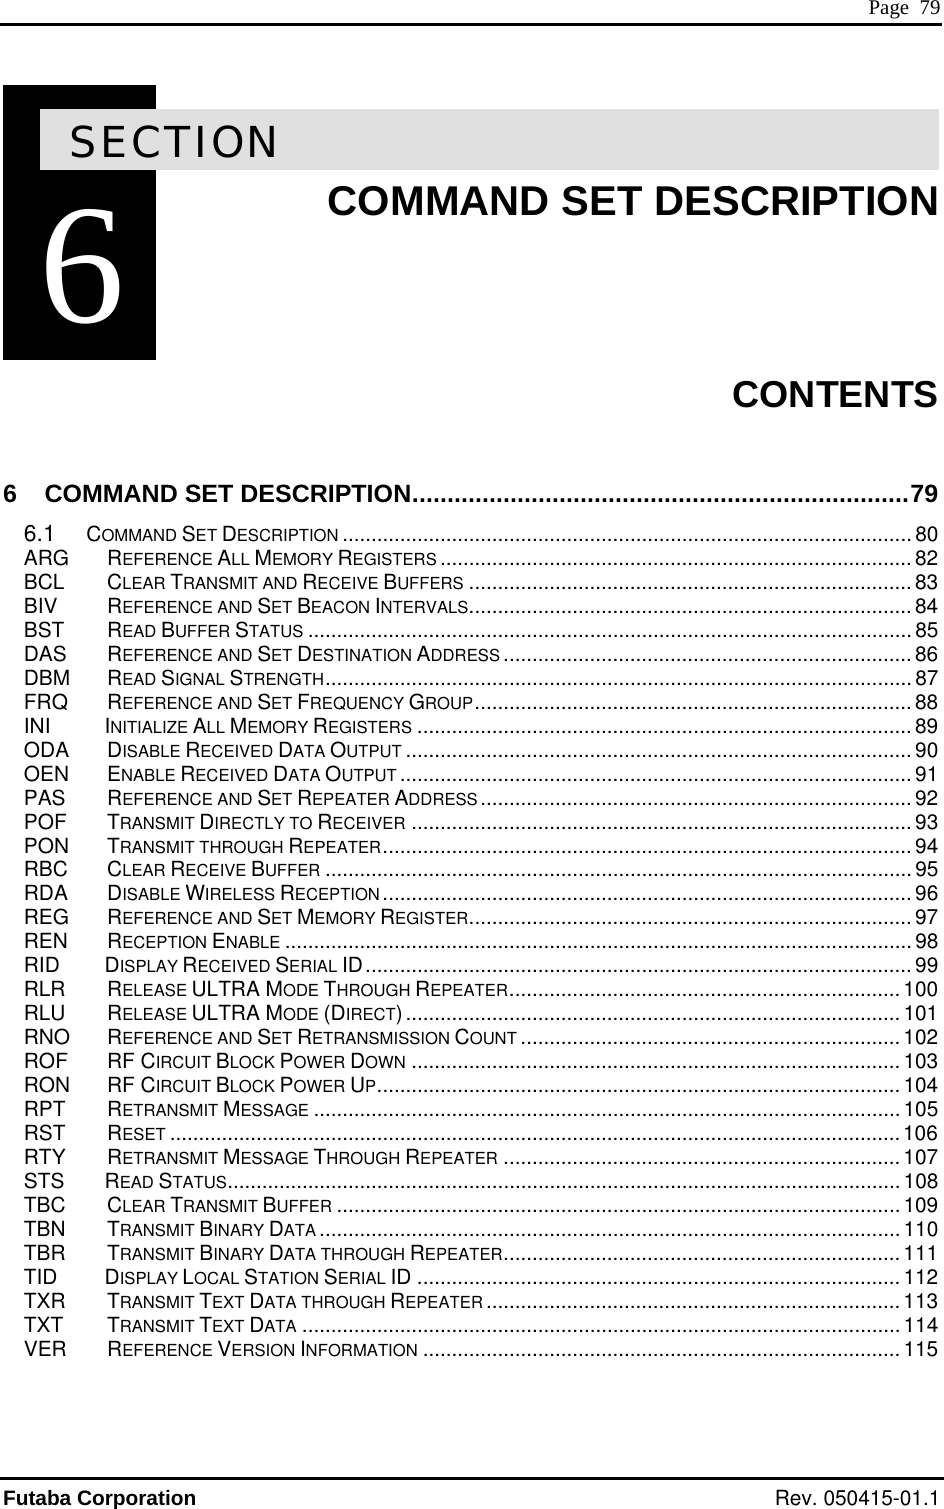  Page  79 6SECTION 6  COMMAND SET DESCRIPTION    CONTENTS  6 COMMAND SET DE TION.......................................................................79 6.1 COMMA .................... 80 ARG REFE .................... 82 BCL CLEAR TRANSMIT AND RECEIVE BUFFERS ............................................................................. 83 ...... 84   87 ......... 88 89 ................... 90 OEN ENABLE RECEIVED DATA OUTPUT ......................................................................................... 91 PAS REFERENCE AND SET REPEATER ADDRESS........................................................................... 92 ER ....................................................................................... 93 ............................................................................................ 94 RBC CECEI FER ...................................................................................................... 95 RDA DISABLE WIRE RECEP ............................................................................................ 96 REG REF ENCE AN ET MEMORY REGIST 97 REN RECEPTION ENABLE ............................................................................................................. 98 RID     DISPLAY RECEIVED SERIAL  99 RLR RELEASE ULTR ODE TH GH REPEATER.................................................................... 100 RLU RELEASE ULTR ODE (D CT)...................................................................................... 101 RNO REF ENCE AN ET RETRANSMISSION OUNT ..........102 ROF RF  CUIT BLOCK POWER N .....................................................................................103 RON RF  CUIT BLOCK POWER ...........................................................................................104 RPT RETRANSMIT ME......................................................................................................105 RST RESET ...............................................................................................................................106 RTY RETRANSMIT MES .....................................107 STS     READ STATUS..................................................................................................................... 108 TBC CLEAR TRANSMIT BUFFER ..................................................................................................109 .......................................110 .......................................111 D12 TXR  TXT  VER N INFORMATION ................................................................................... 115   SCRIPND SET DESCRIPTION ...............................................................................RENCE ALL MEMORY REGISTERS ..............................................................BIV  REFERENCE AND SET BEACON INTERVALS.......................................................................BST READ BUFFER STATUS ......................................................................................................... 85DAS REFERENCE AND SET DESTINATION ADDRESS ....................................................................... 86DBM READ SIGNAL STRENGTH......................................................................................................FRQ REFERENCE AND SET FREQUENCY GROUP...................................................................INI     INITIALIZE ALL MEMORY REGISTERS ......................................................................................ODA DISABLE RECEIVED DATA OUTPUT .....................................................................POF TRANSMIT DIRECTLY TO RECEIVPON TRANSMIT THROUGH REPEATERLEAR RVE BUFL  ESS TIONER D SER.............................................................................ID...............................................................................................A M ROUA M IREER D S C........................................................CIR  DOWCIR  UPESSAGSAGE THROUGH REPEATER ................................TBN TRANSMIT BINARY DATA ..............................................................TBR TRANSMIT BINARY DATA THROUGH REPEATER..............................TI      DISPLAY LOCAL STATION SERIAL ID .................................................................................... 1 TRANSMIT TEXT DATA THROUGH REPEATER ........................................................................113 TRANSMIT TEXT DATA ........................................................................................................ 114 REFERENCE VERSIOFutaba Corporation Rev. 050415-01.1 